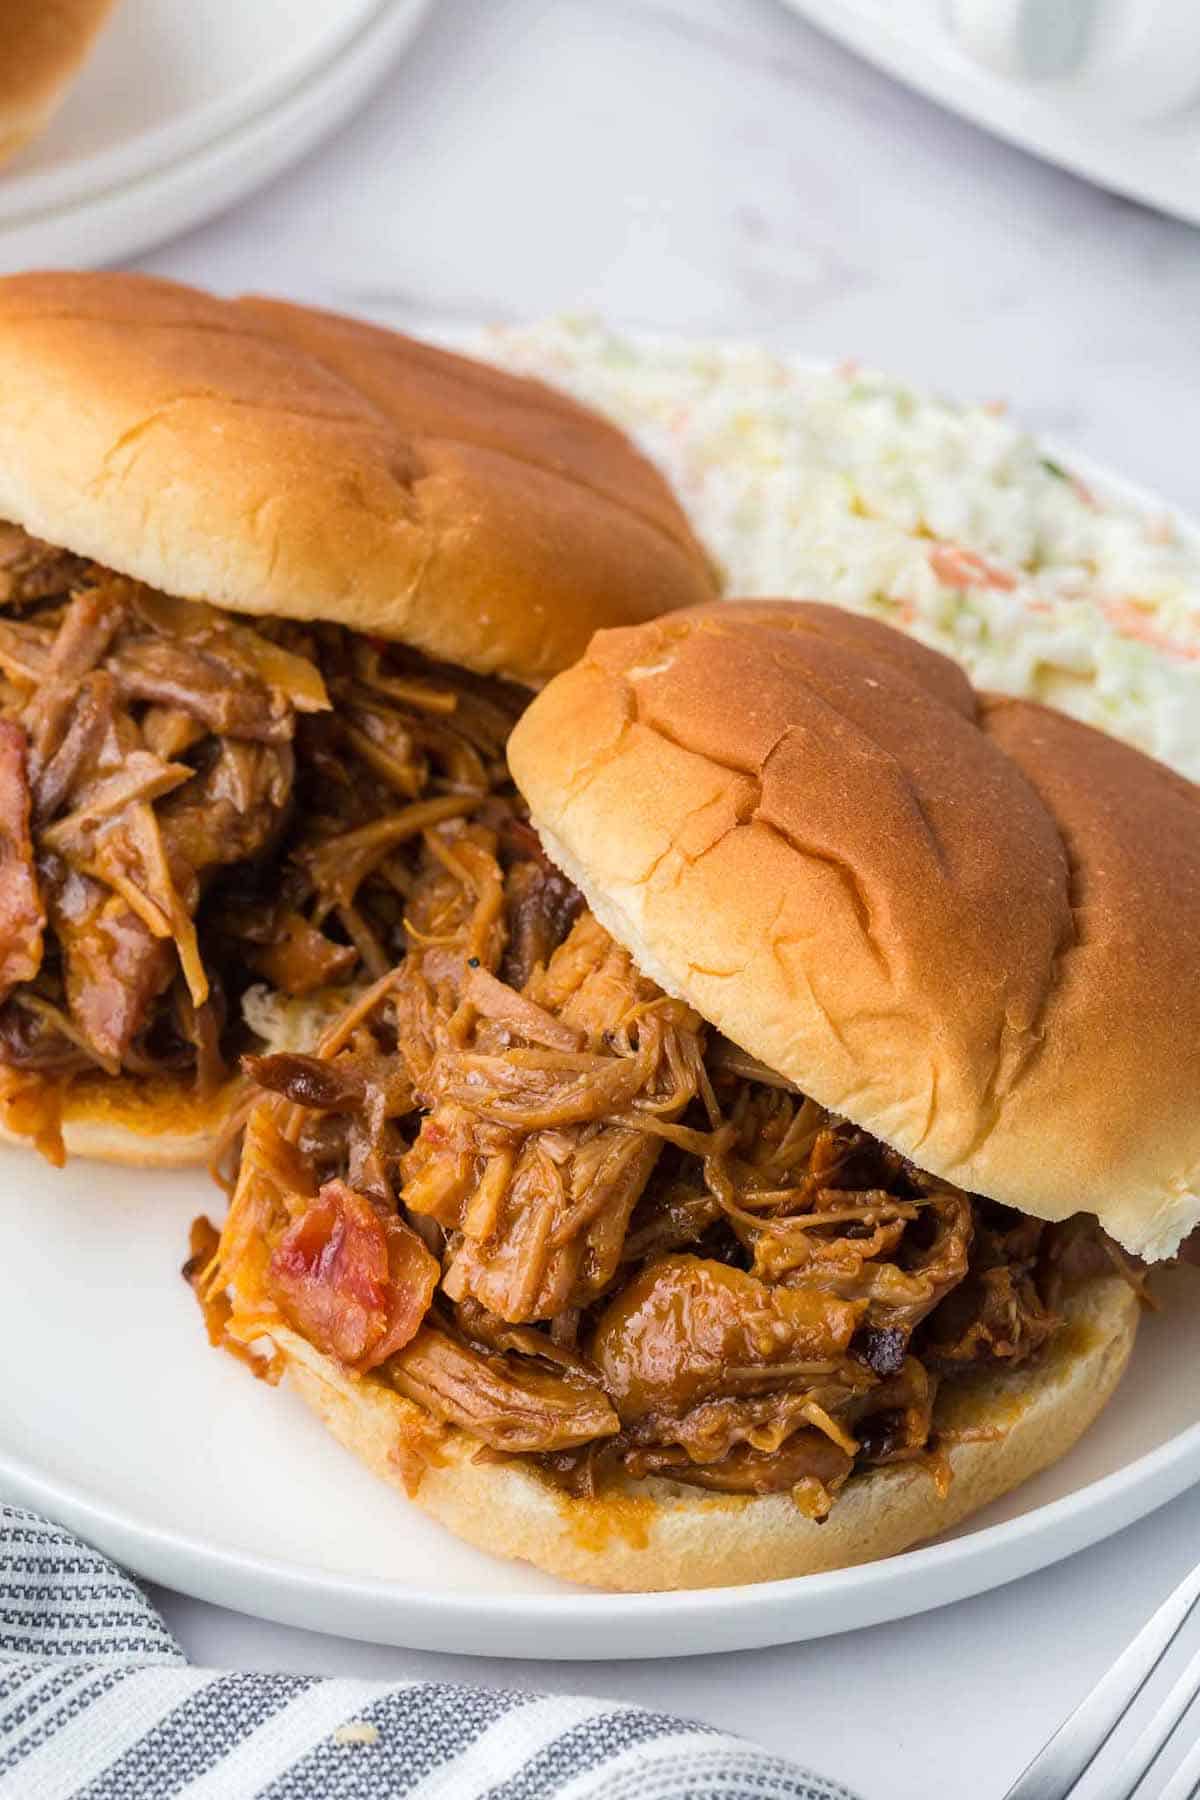 Pulled pork sandwich on a white plate with coleslaw.